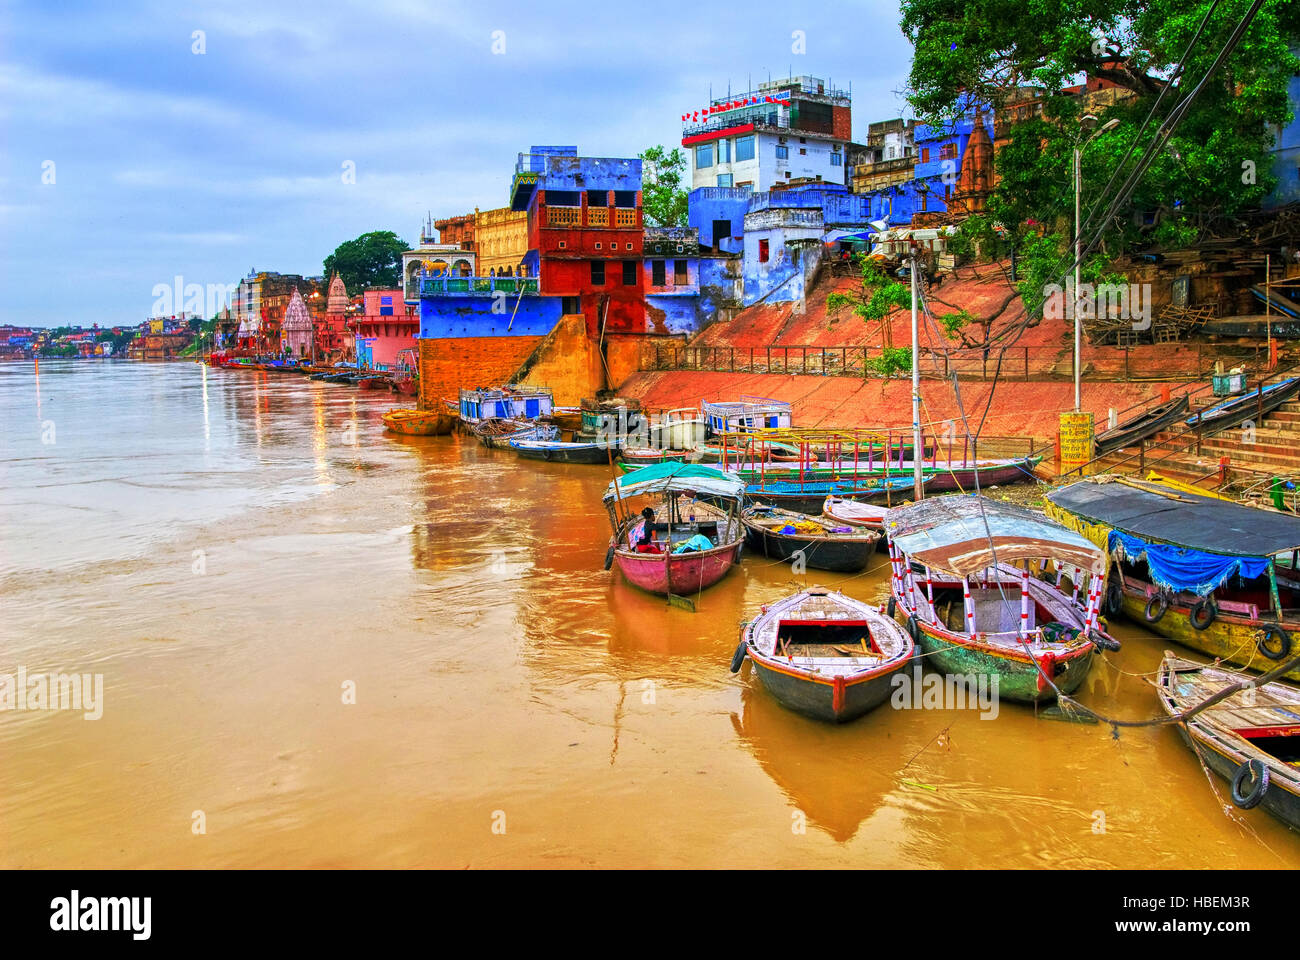 View of Varanasi on river Ganges, India Stock Photo